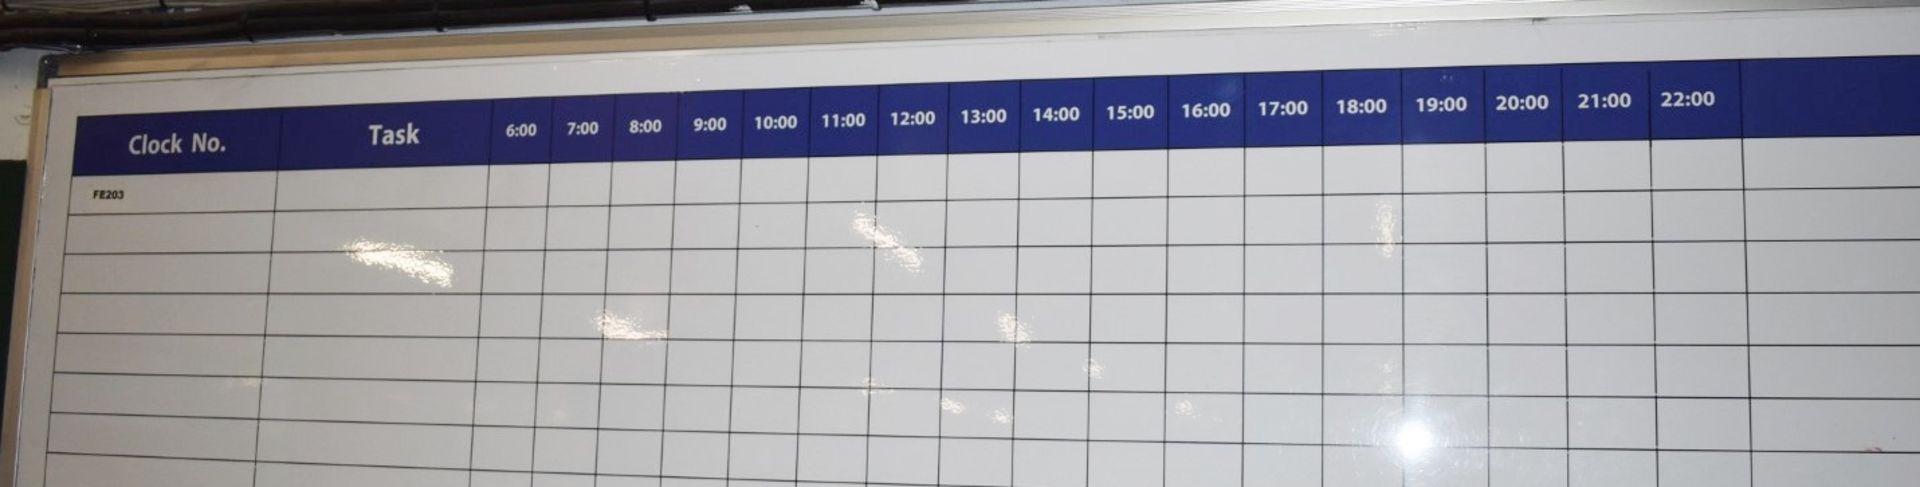 1 x Warehouse Day Planner White Board - Wall Mounted - 200 x 120 cms - Ref FE203 WH - CL480 - - Image 2 of 2